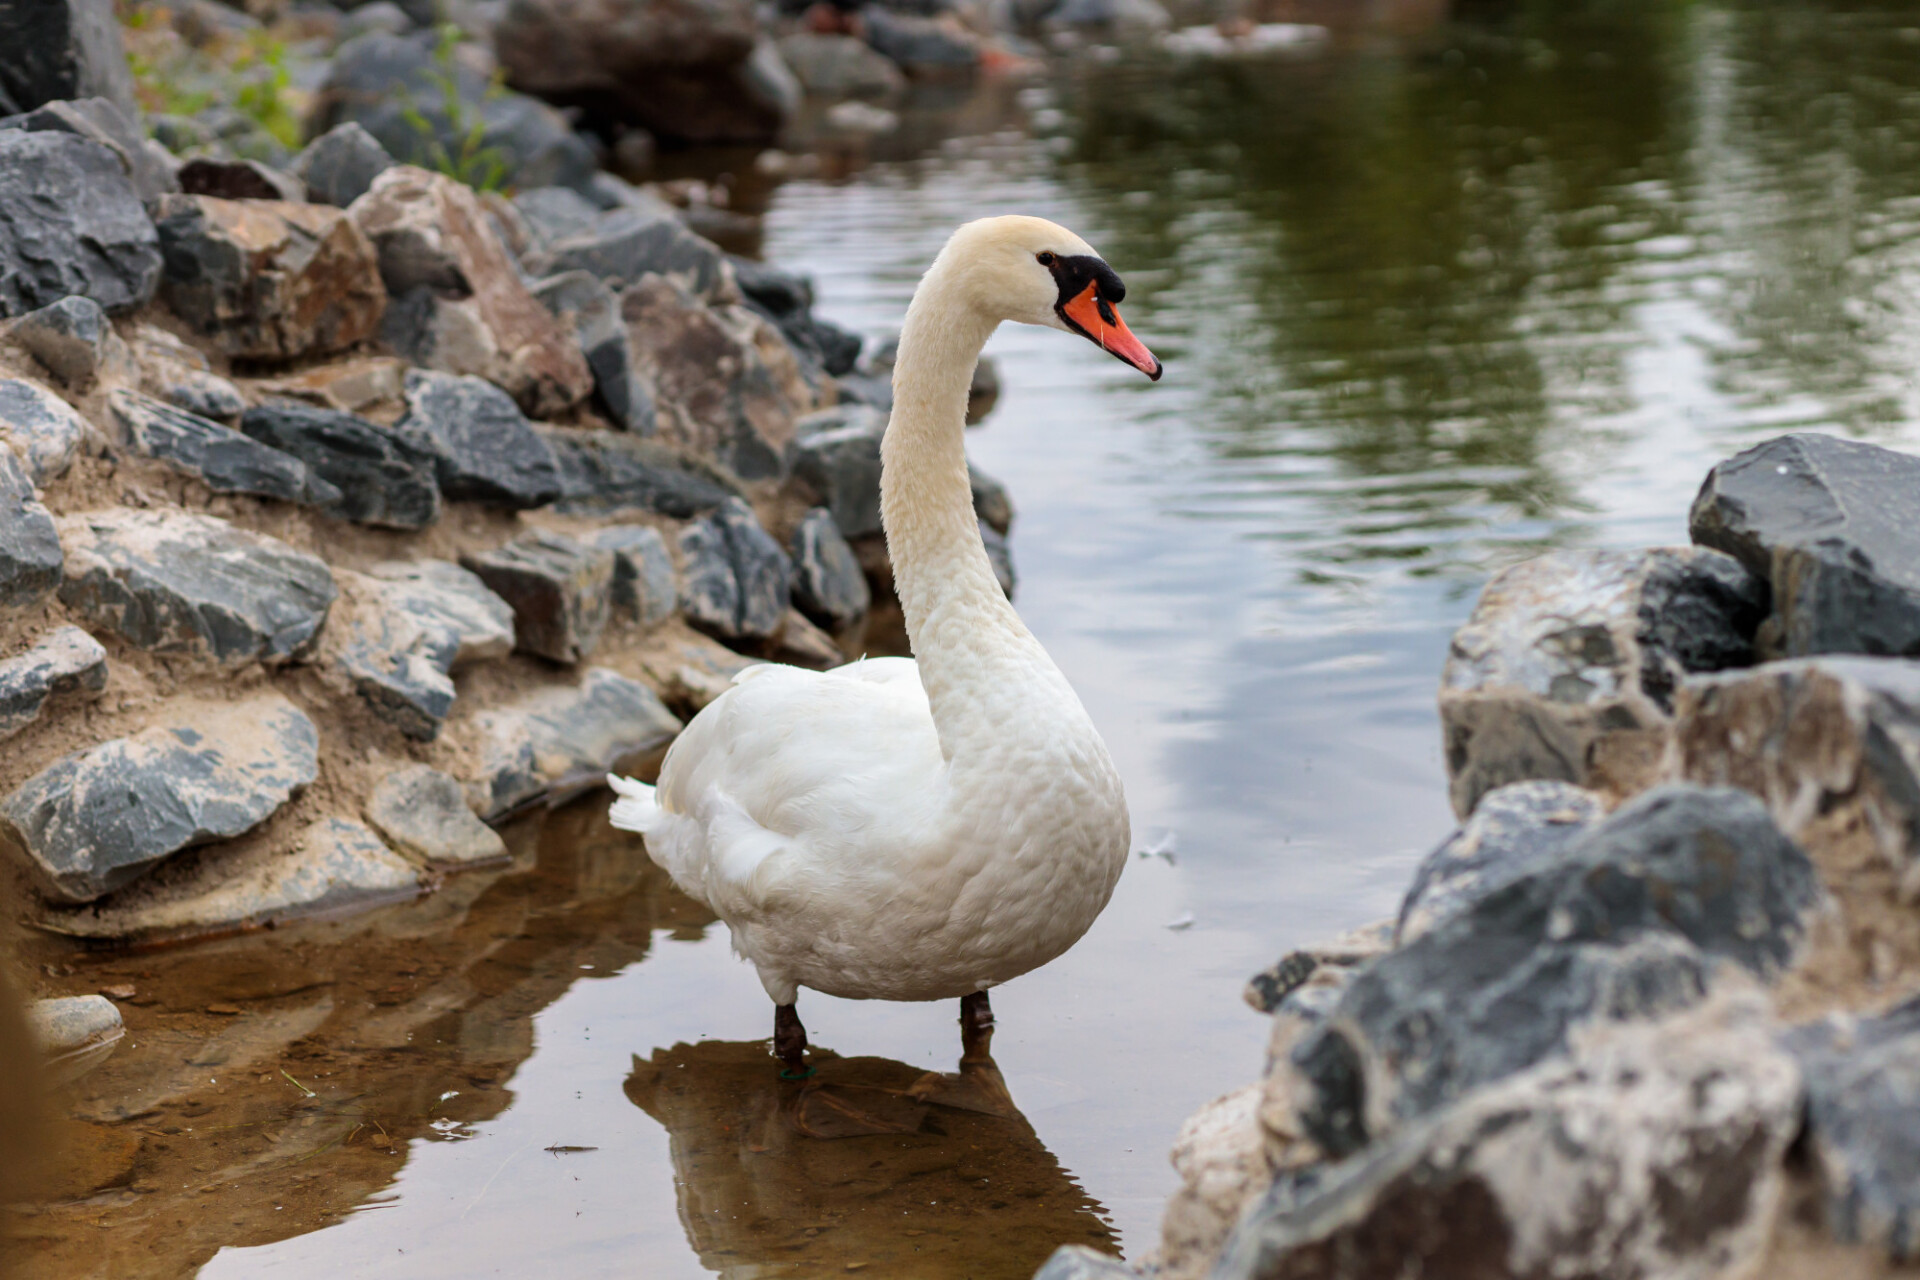 White swan standing in shallow water